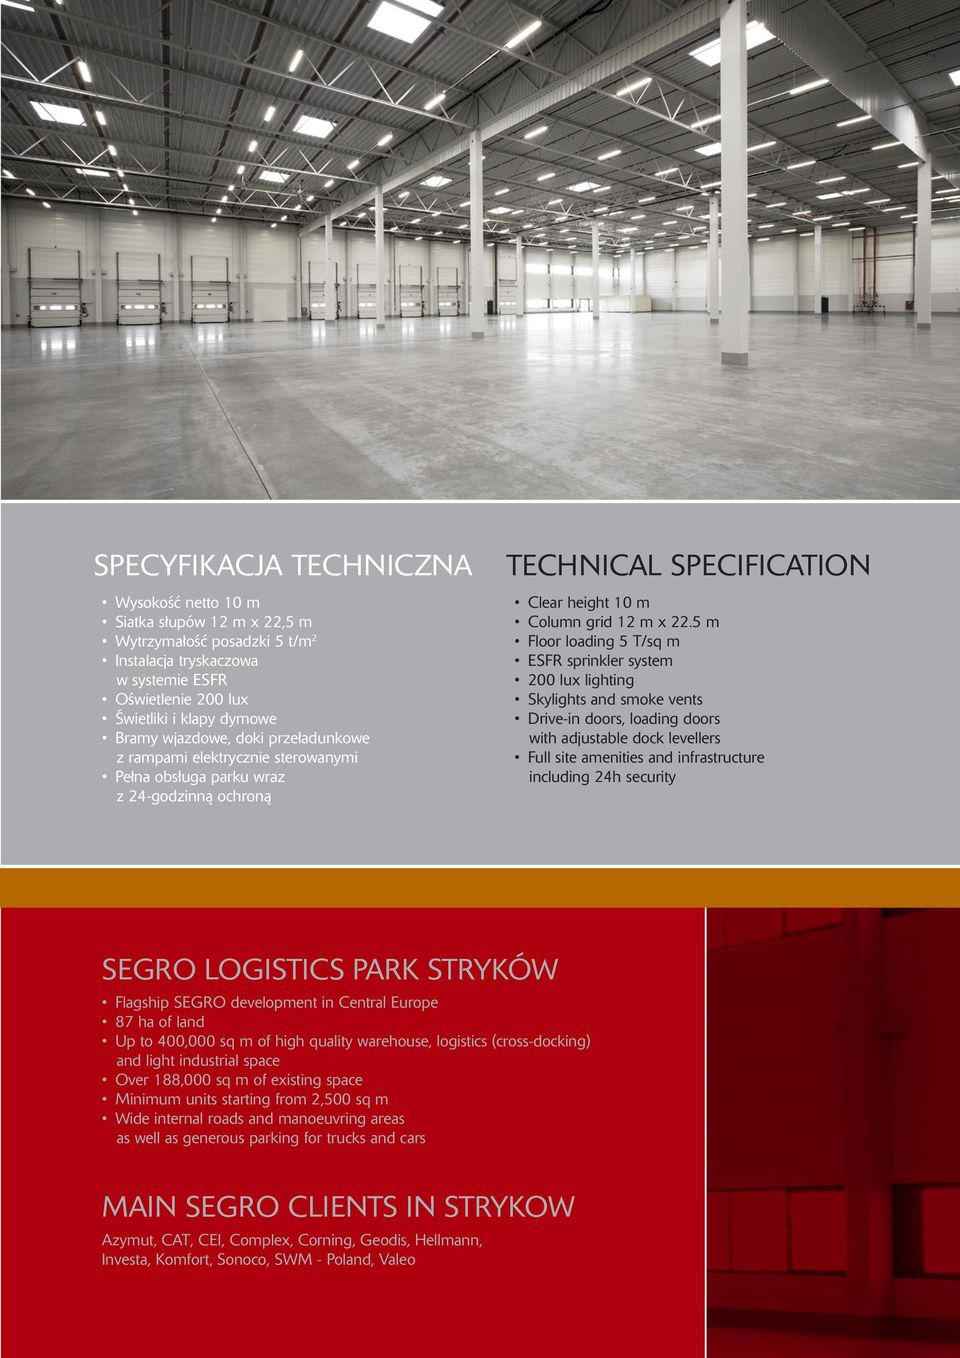 5 m Floor loading 5 T/sq m ESFR sprinkler system 200 lux lighting Skylights and smoke vents Drive-in doors, loading doors with adjustable dock levellers Full site amenities and infrastructure